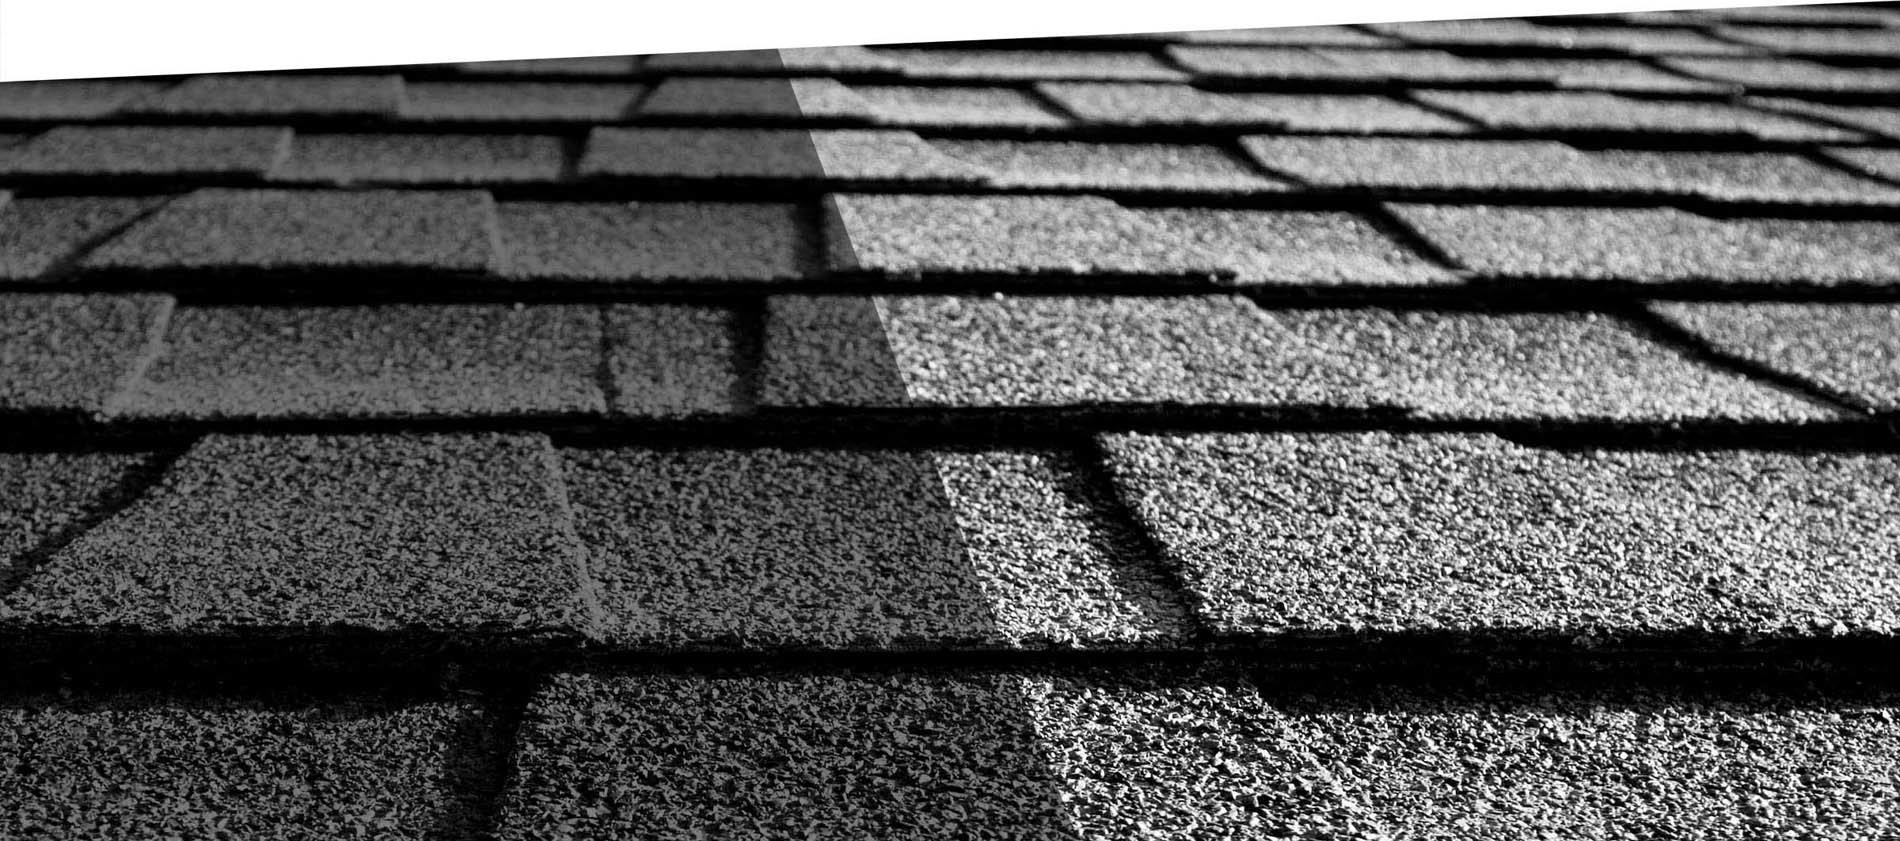 Roof Repair Services Mesa | Residential & Commercial Roof Contractors